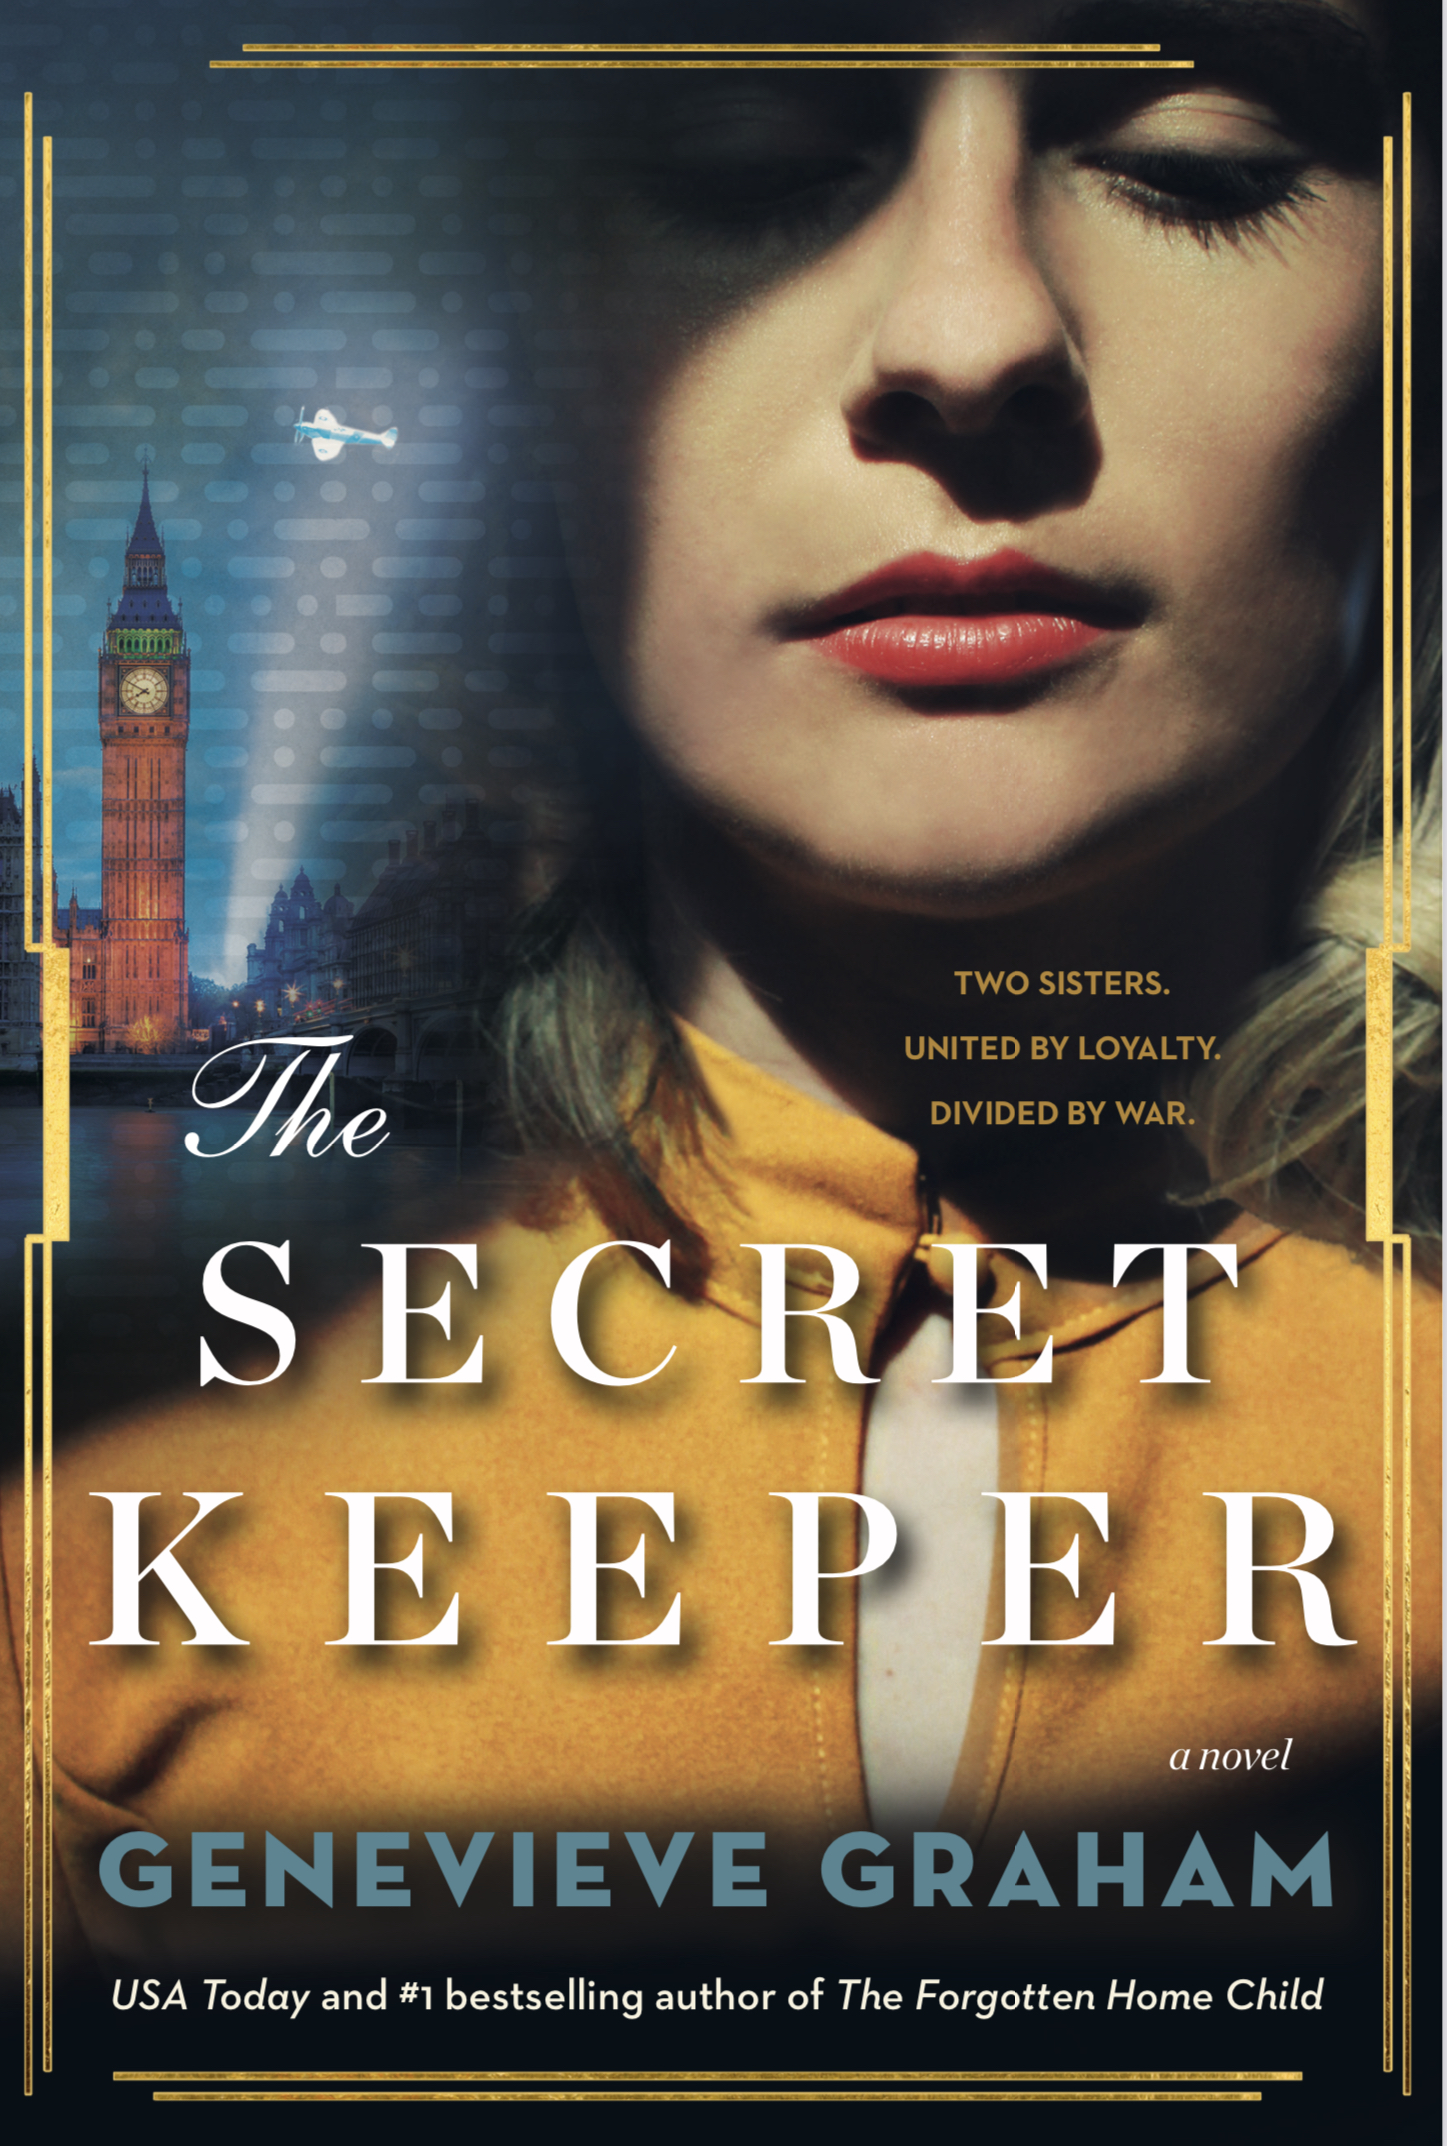 Half shaded woman with closed eyes is wearing yellow and looking serious. In the background is a WW2 airplane in a spotlight over London. The title THE SECRET KEEPER is printed across the middle of the cover.